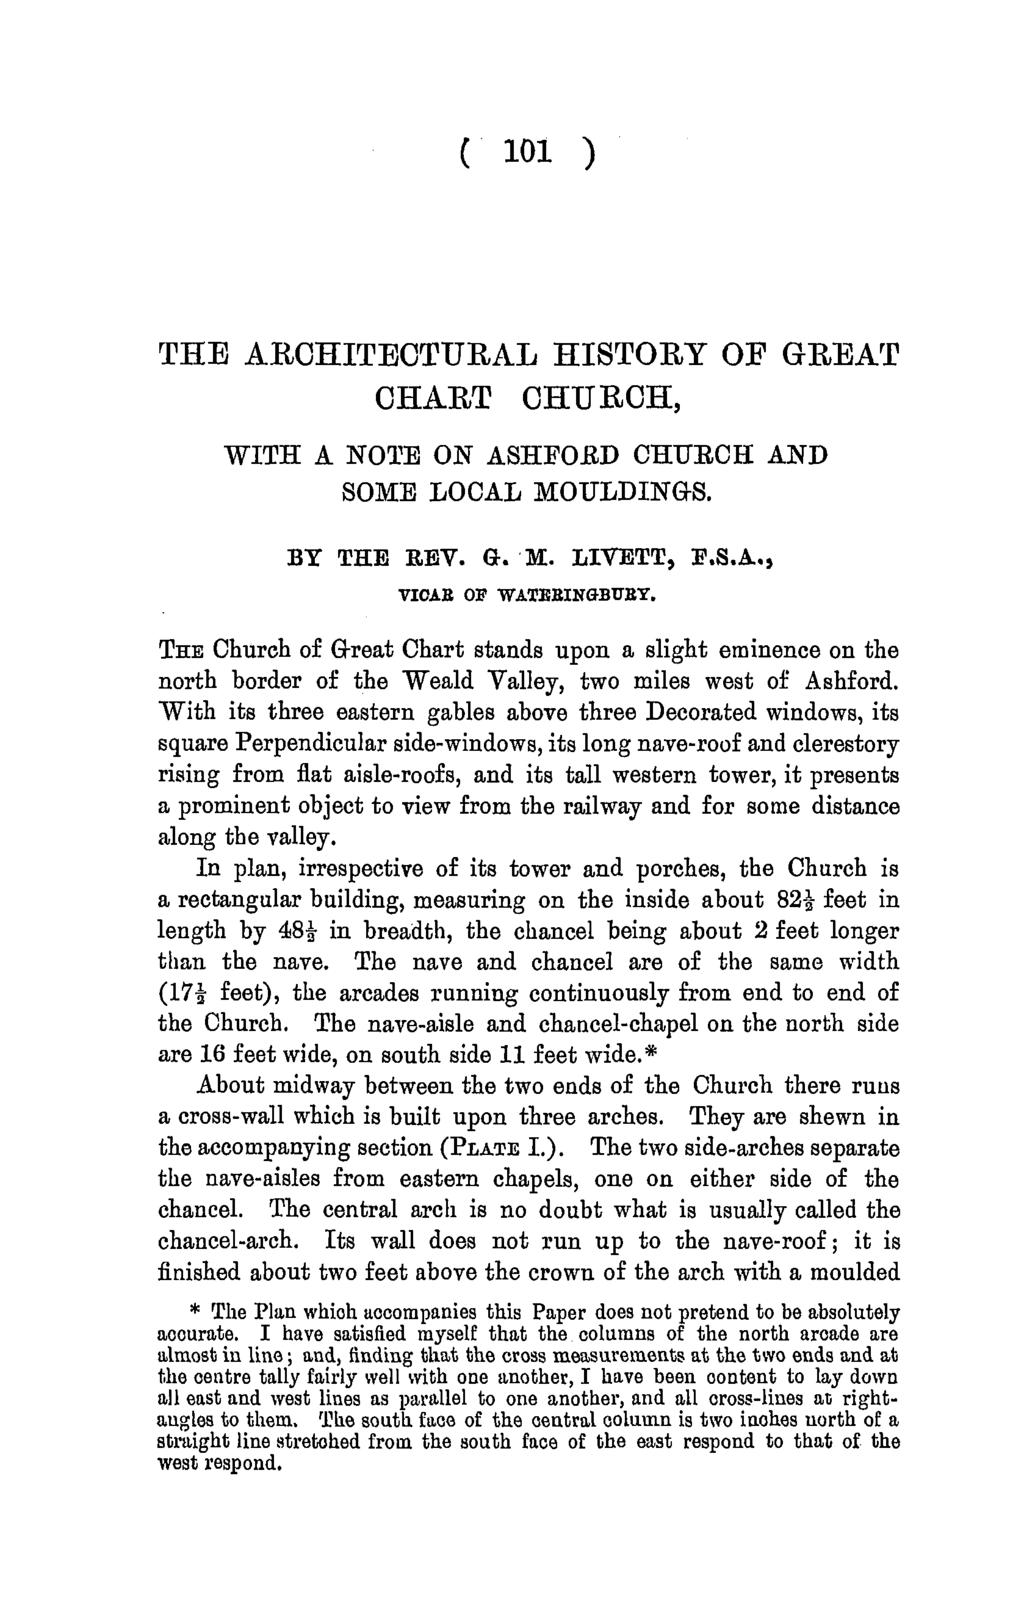 Archaeologia Cantiana Vol. 26 1904 THE ARCHITECTURAL HISTORY OF GREAT CHART CHURCH, WITH A NOTE ON ASHFOED CHUECH AND SOME LOCAL MOULDINQ-S. BY THE REV. G-. M. LIVETT, F.S.A.., VIOAB OF WATJEBINGBUBY.